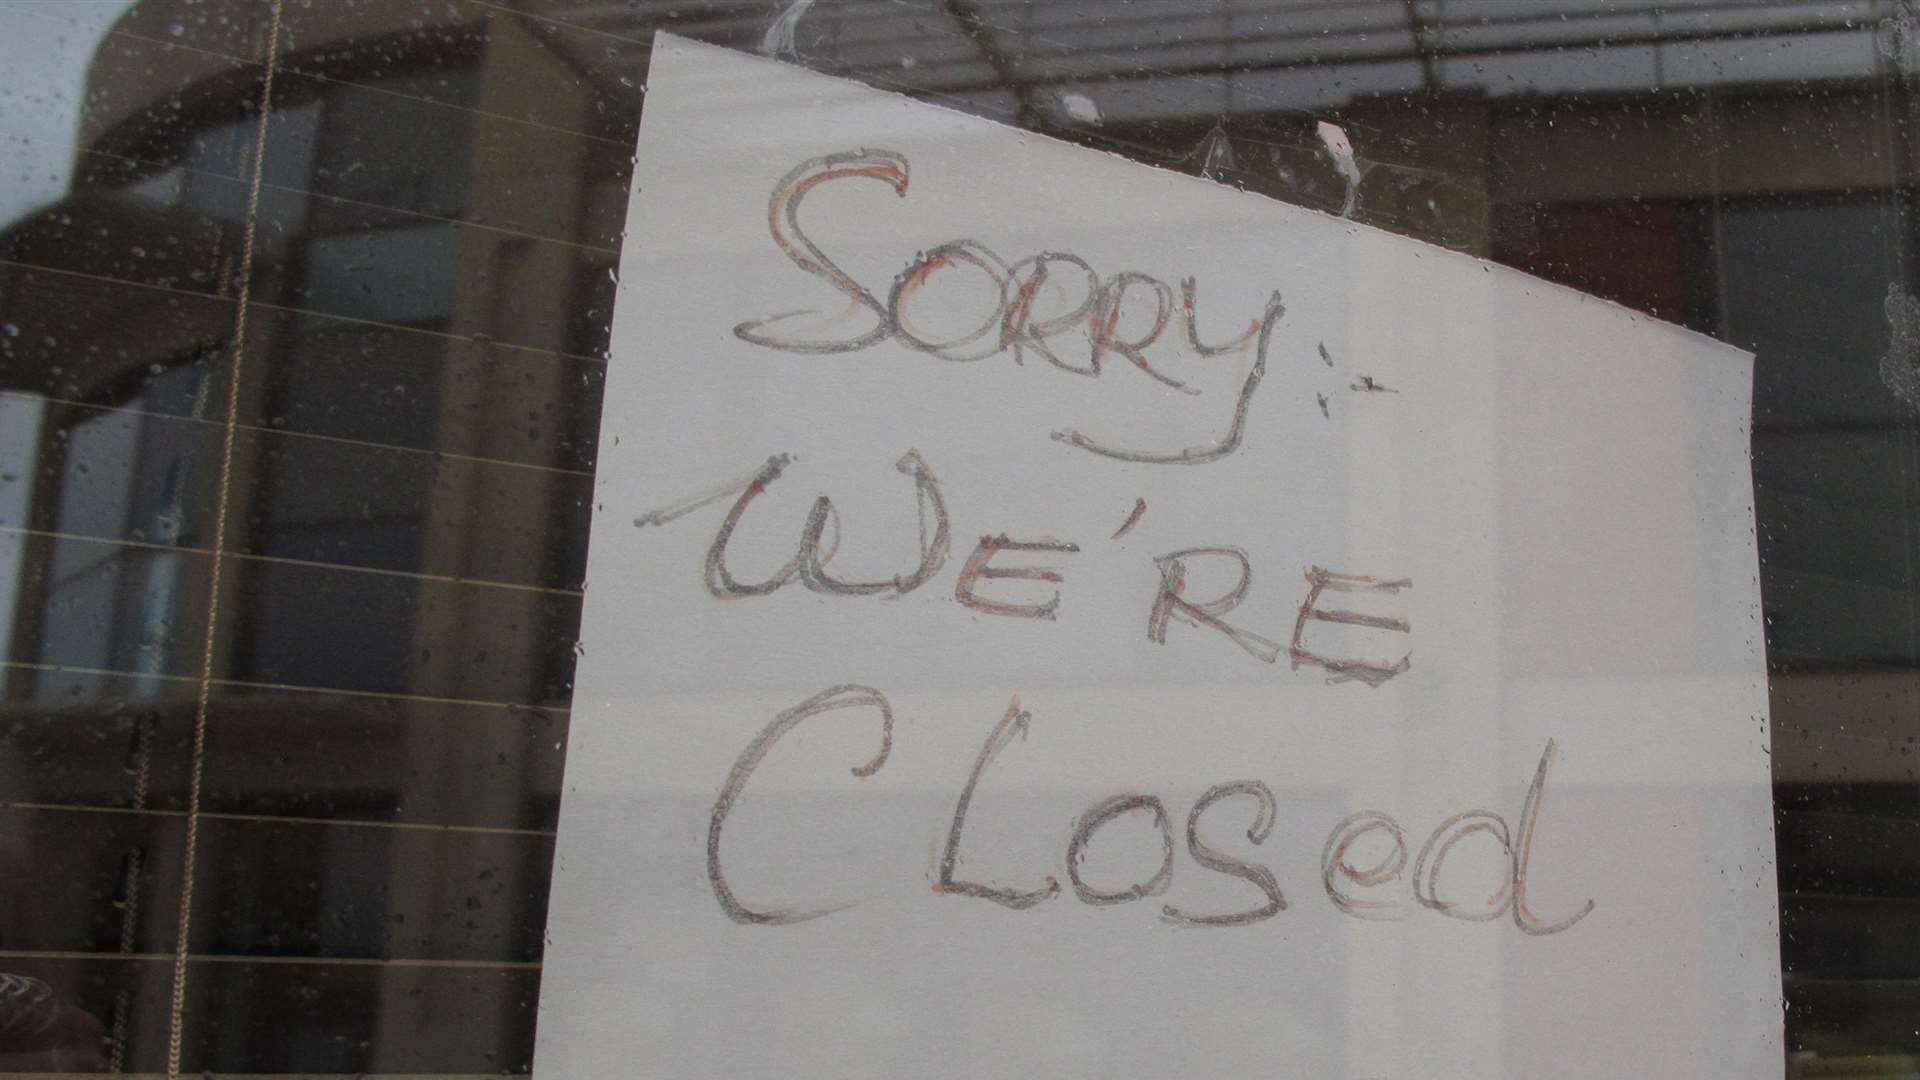 Signs in the window of Memphis Bar reveal is has closed